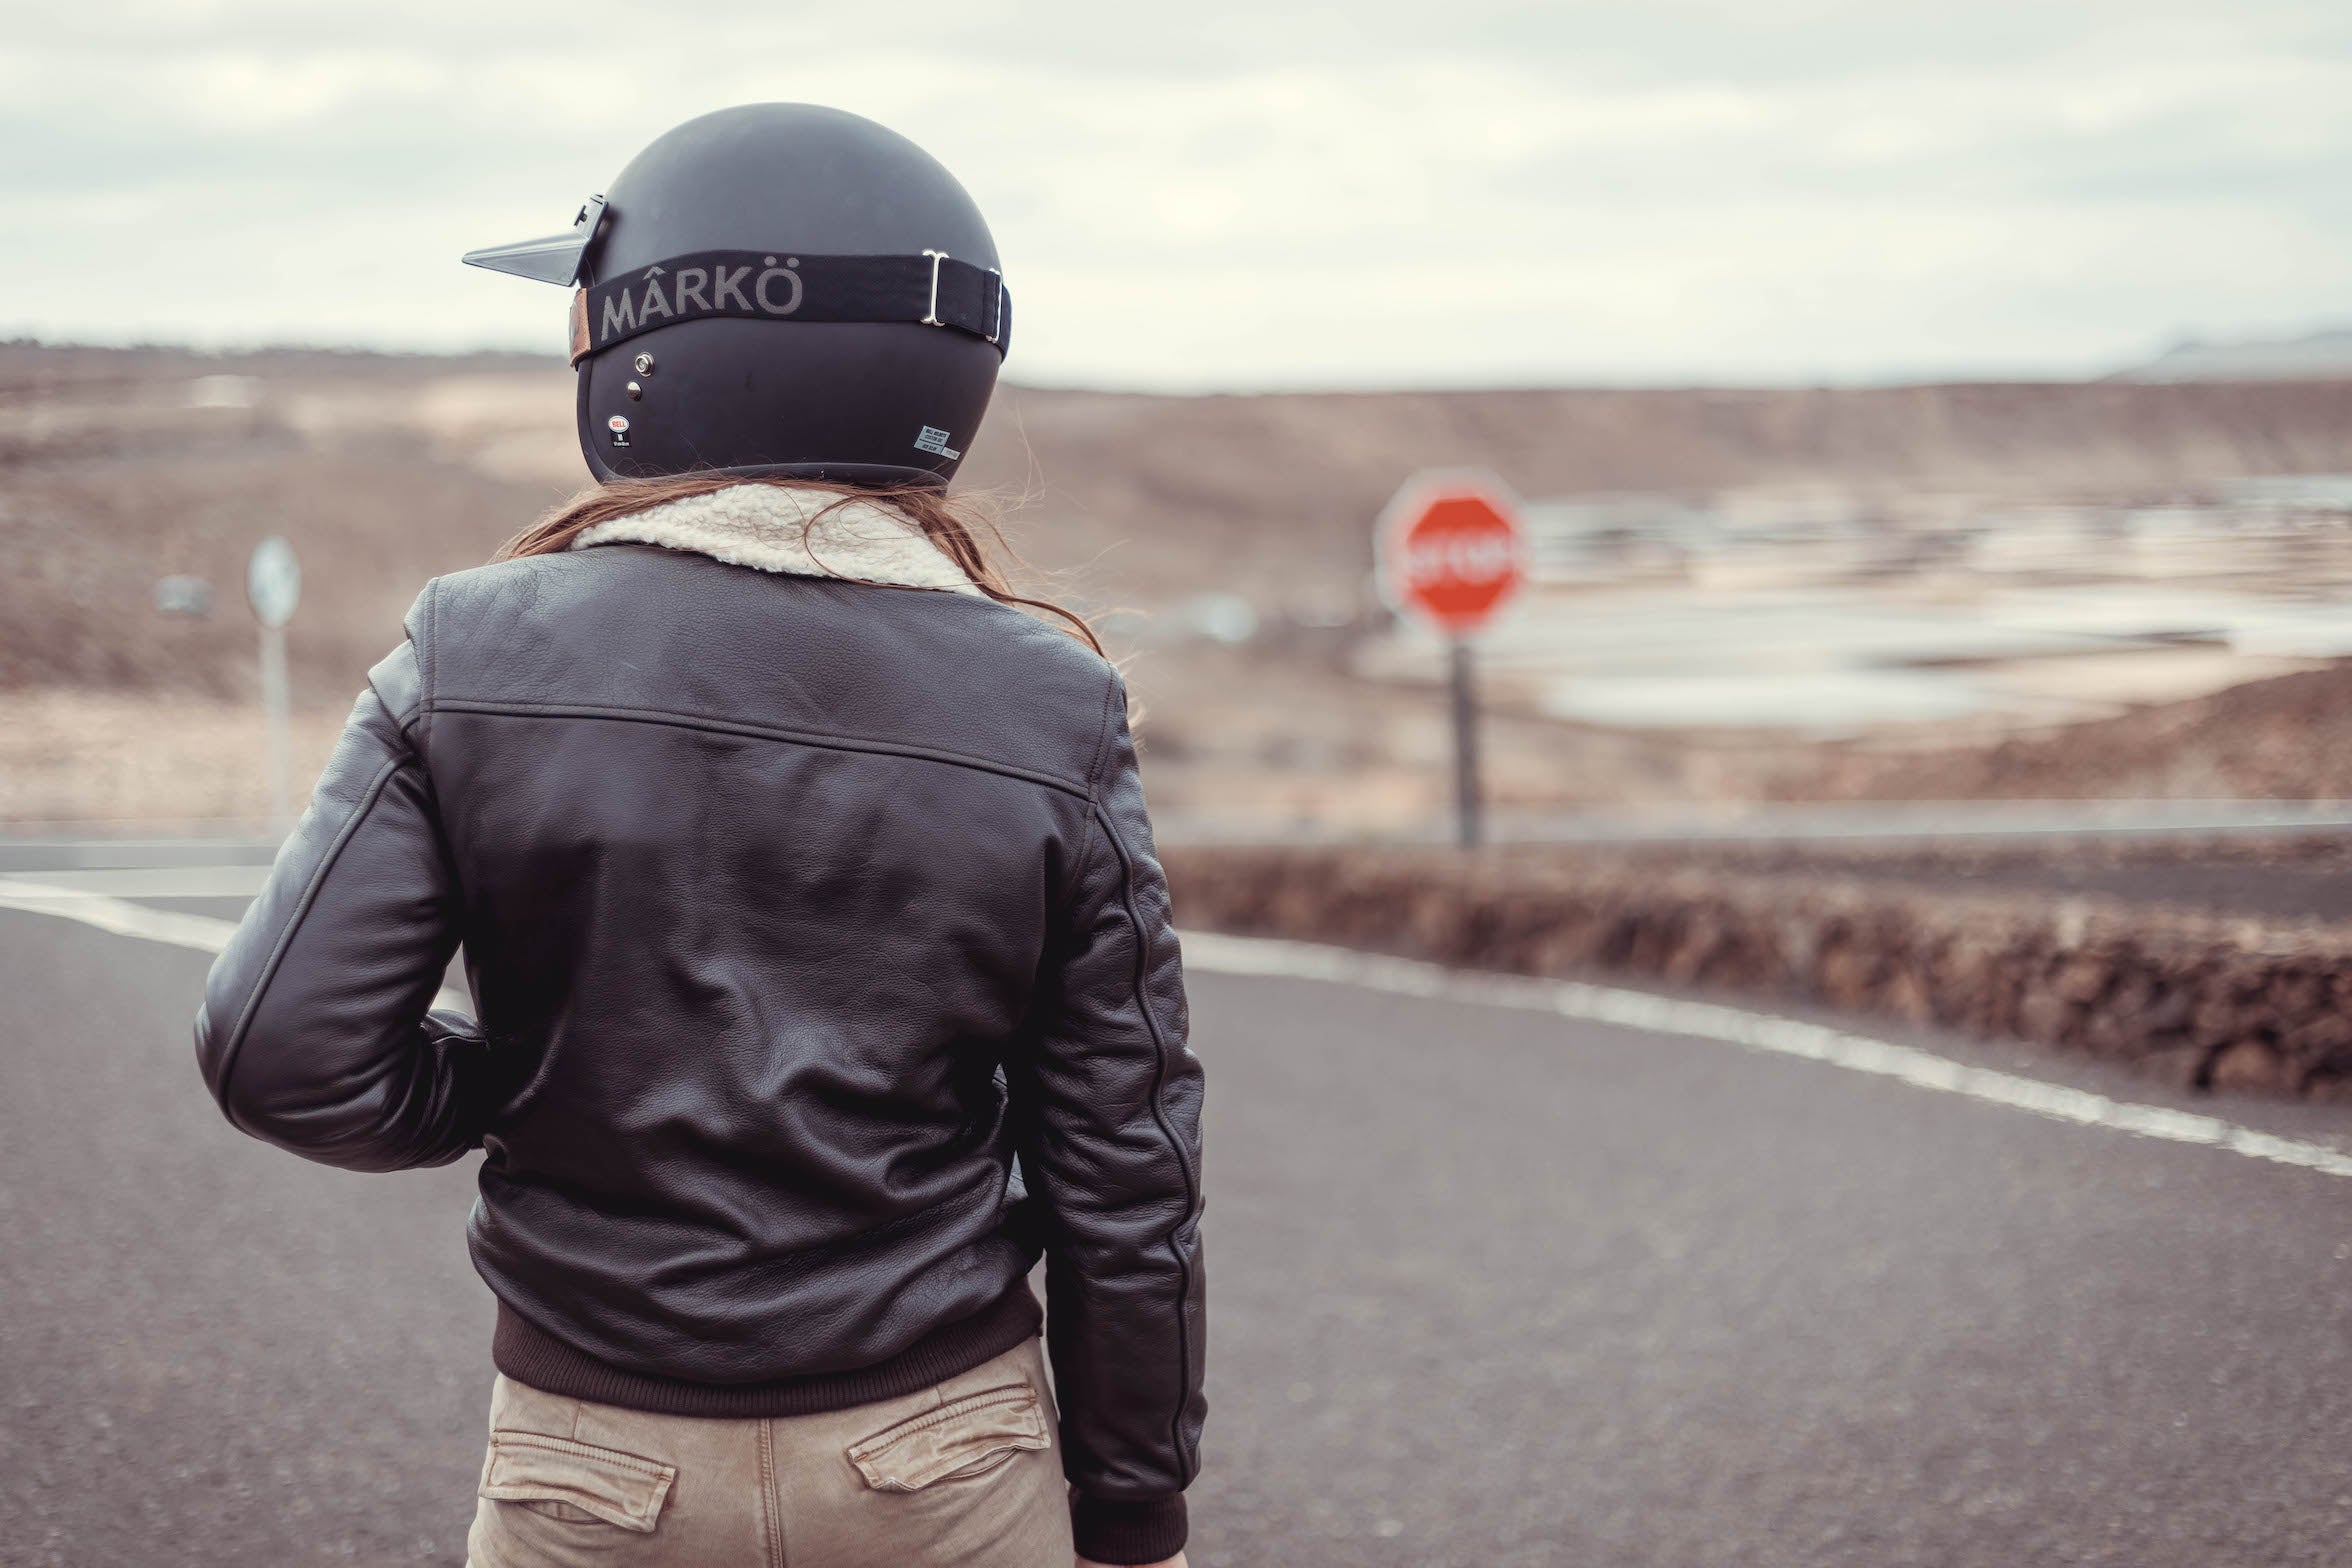 a back of woman motorcyclists wearing brown aviator style jacket